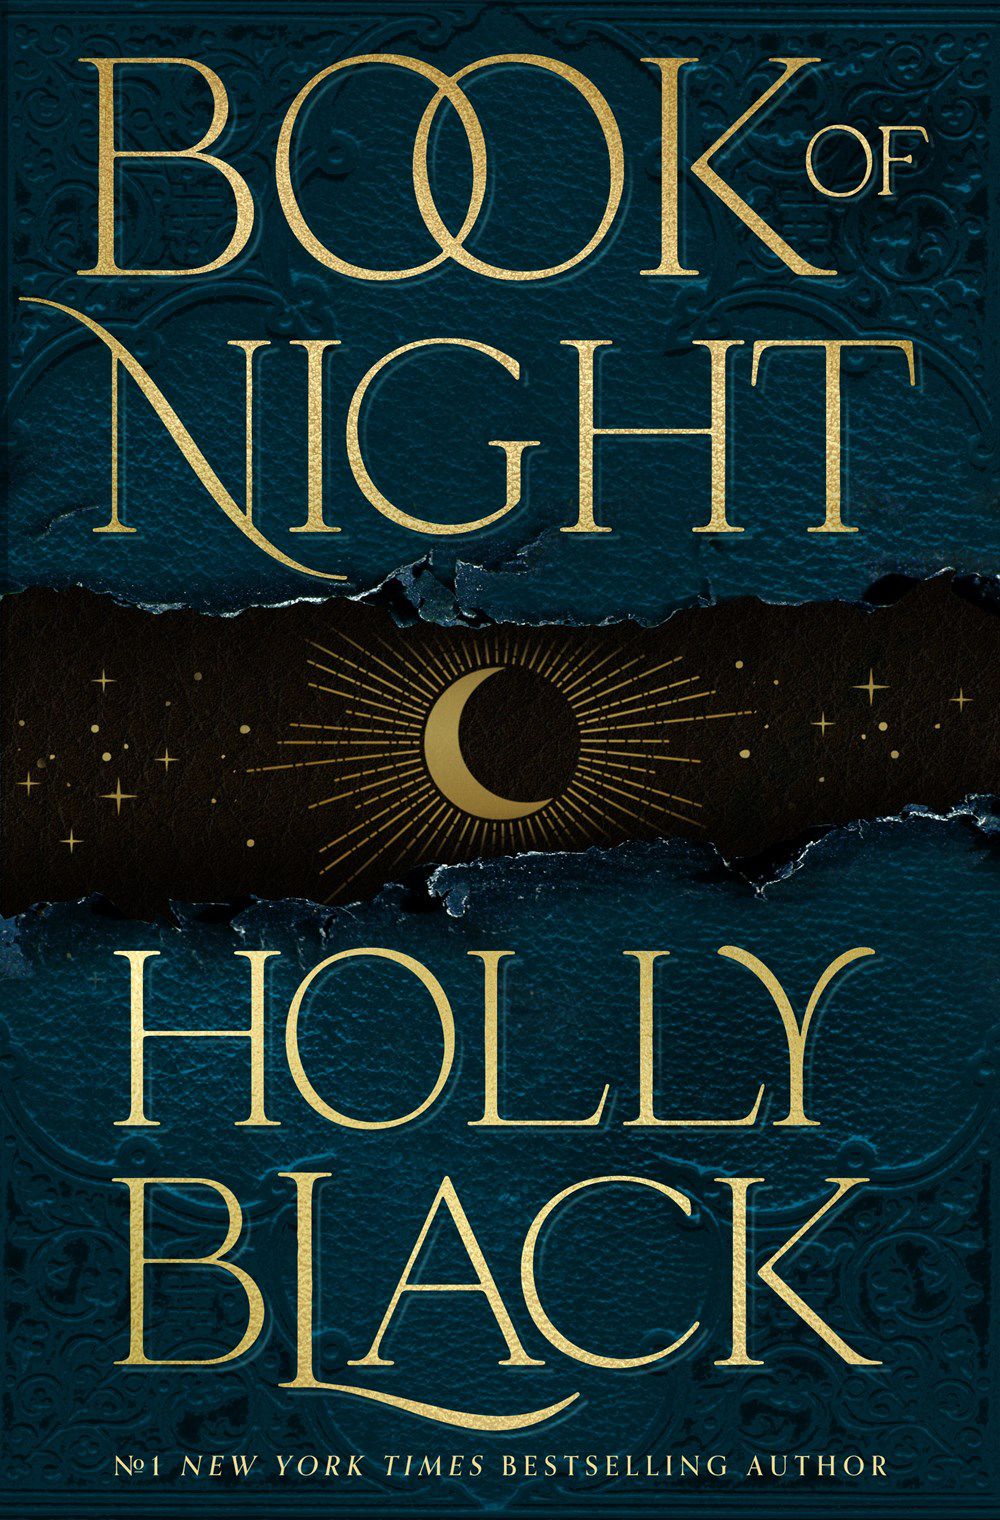 The cover of Book of Night by Holly Black, featuring a crescent moon on a black and blue background.